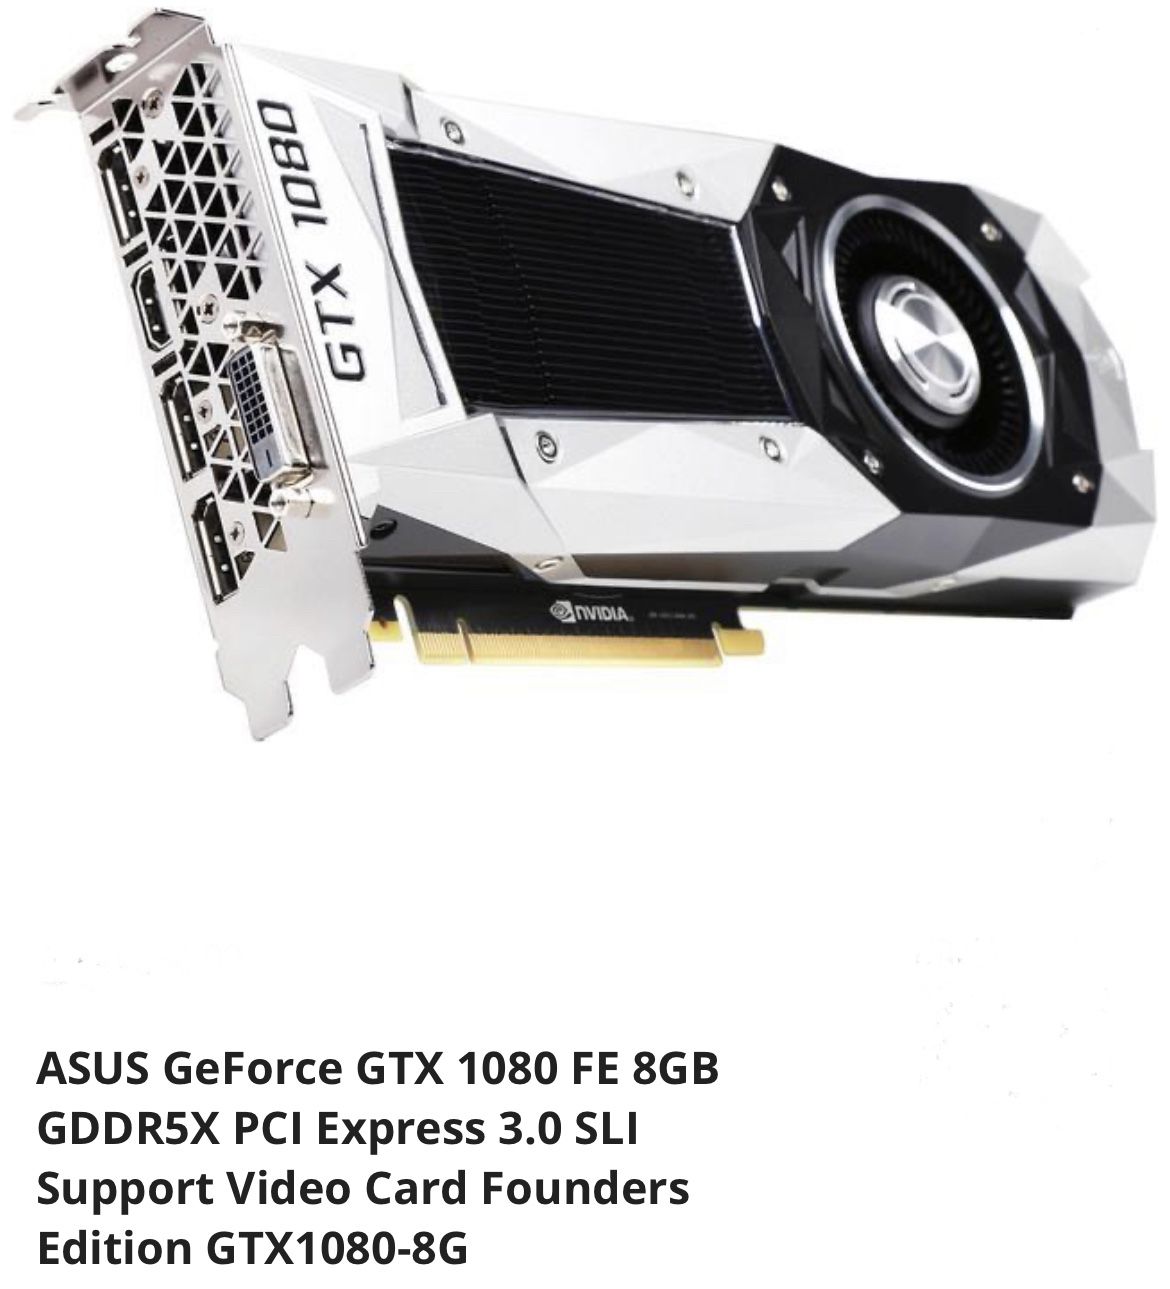 ASUS GTX1080-8G FOUNDERS EDITION